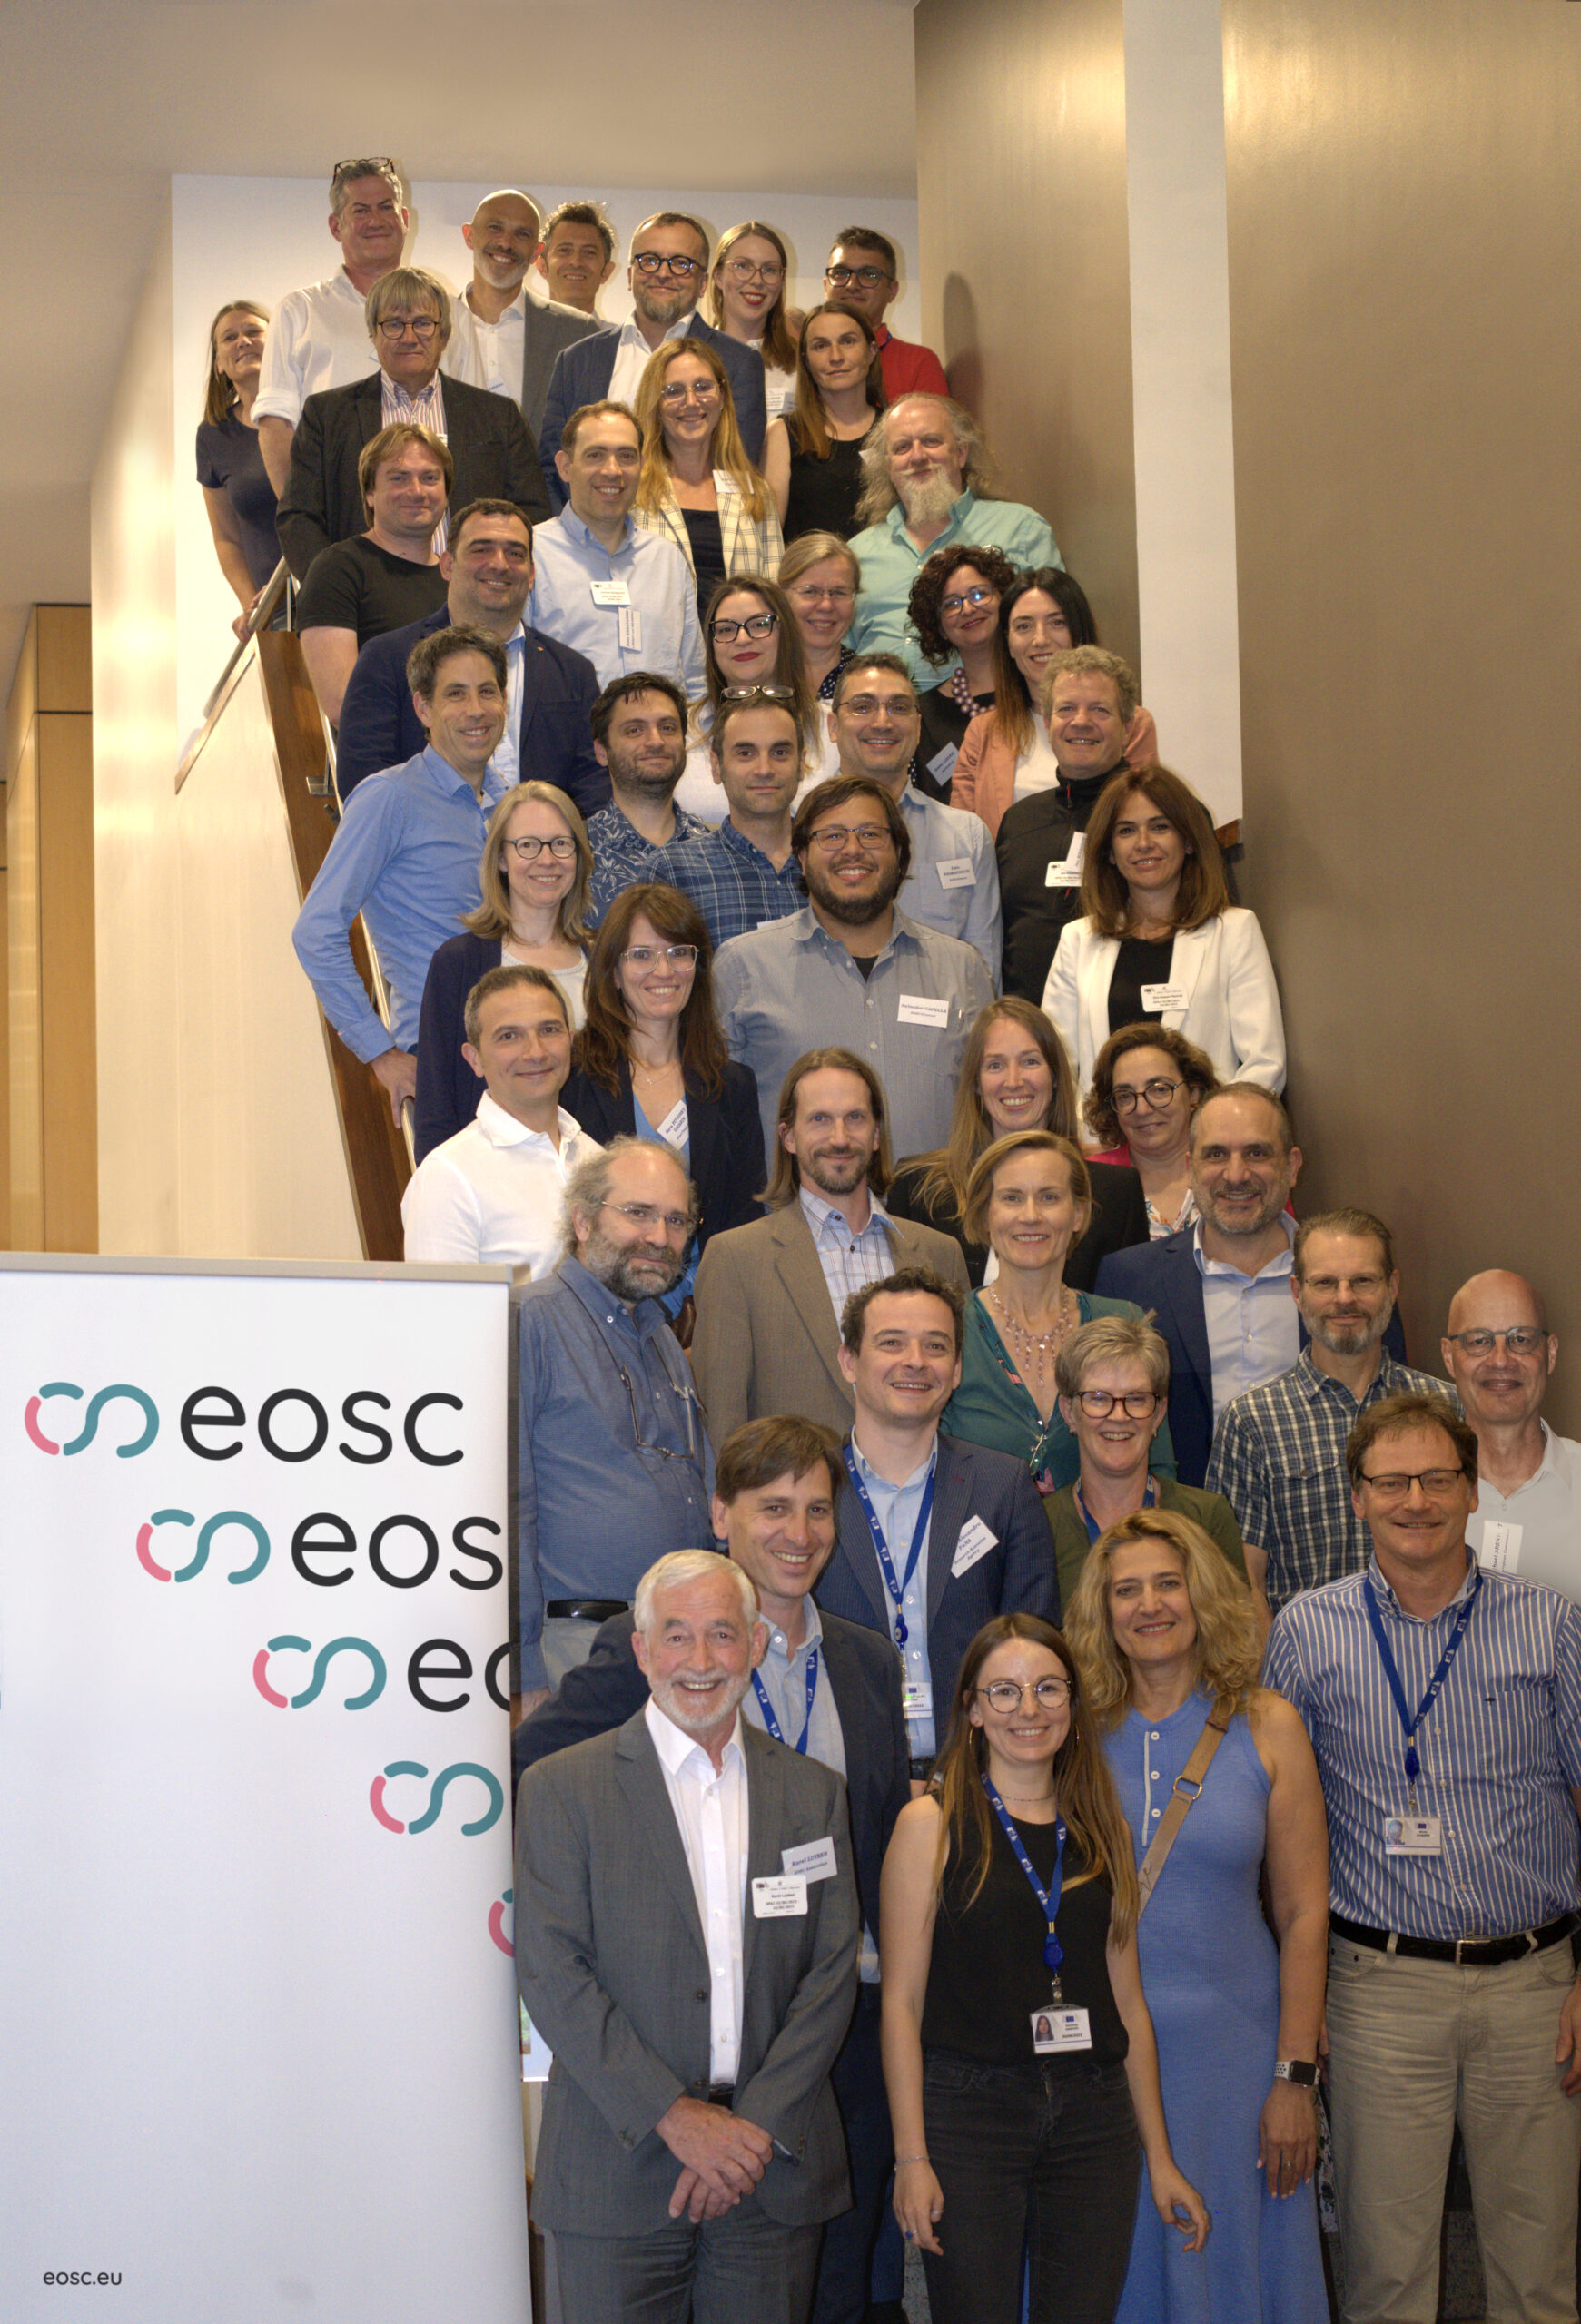 eIRGSP7 Contributes to the Coordination Meeting of EOSC Related HE Projects